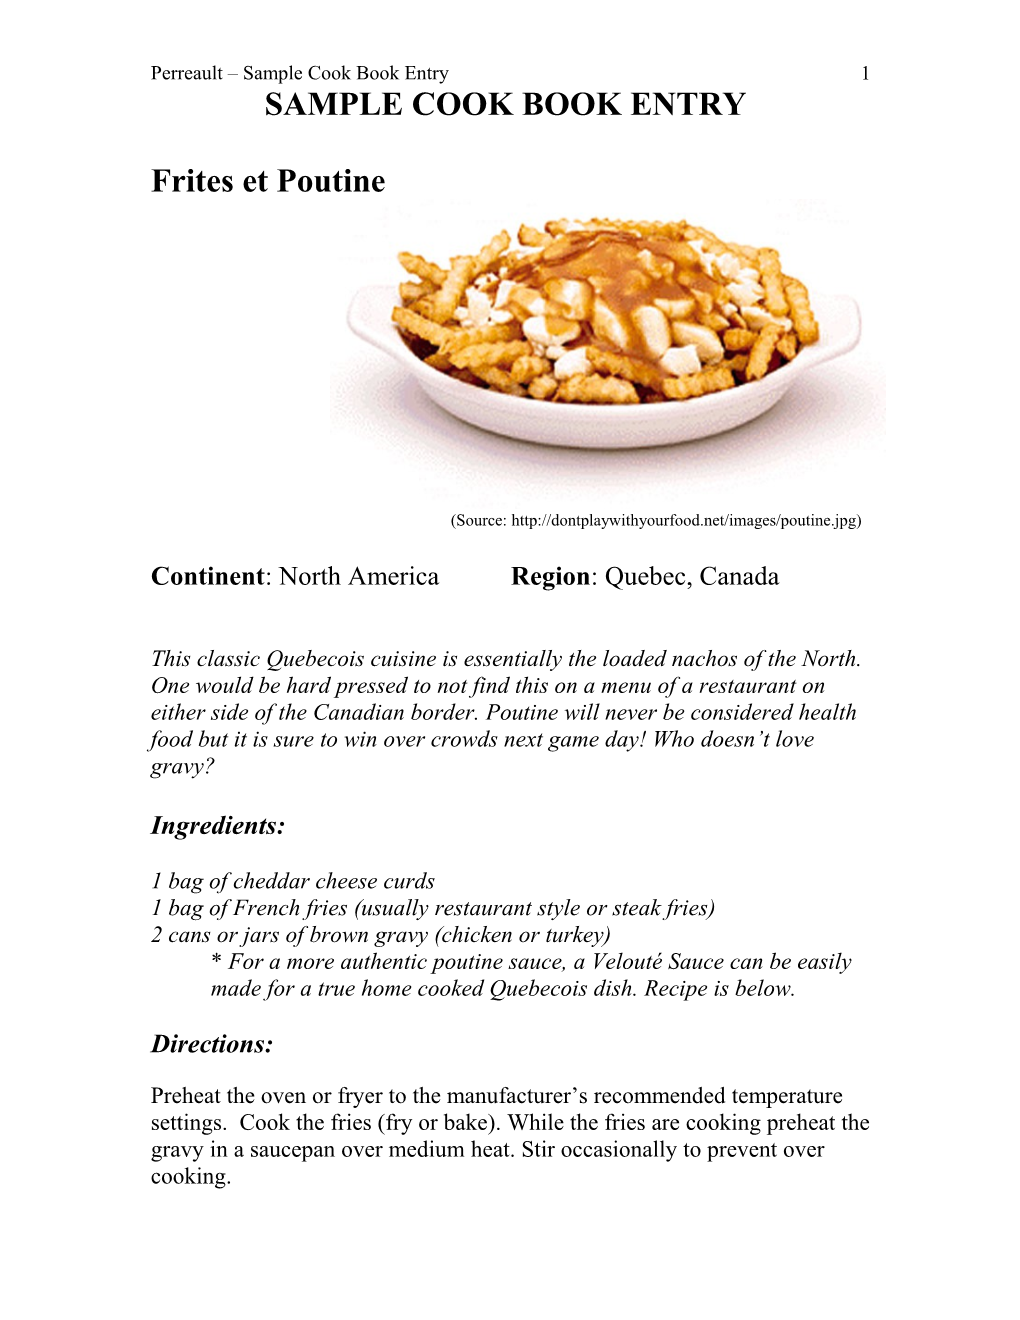 Sample Cook Book Entry